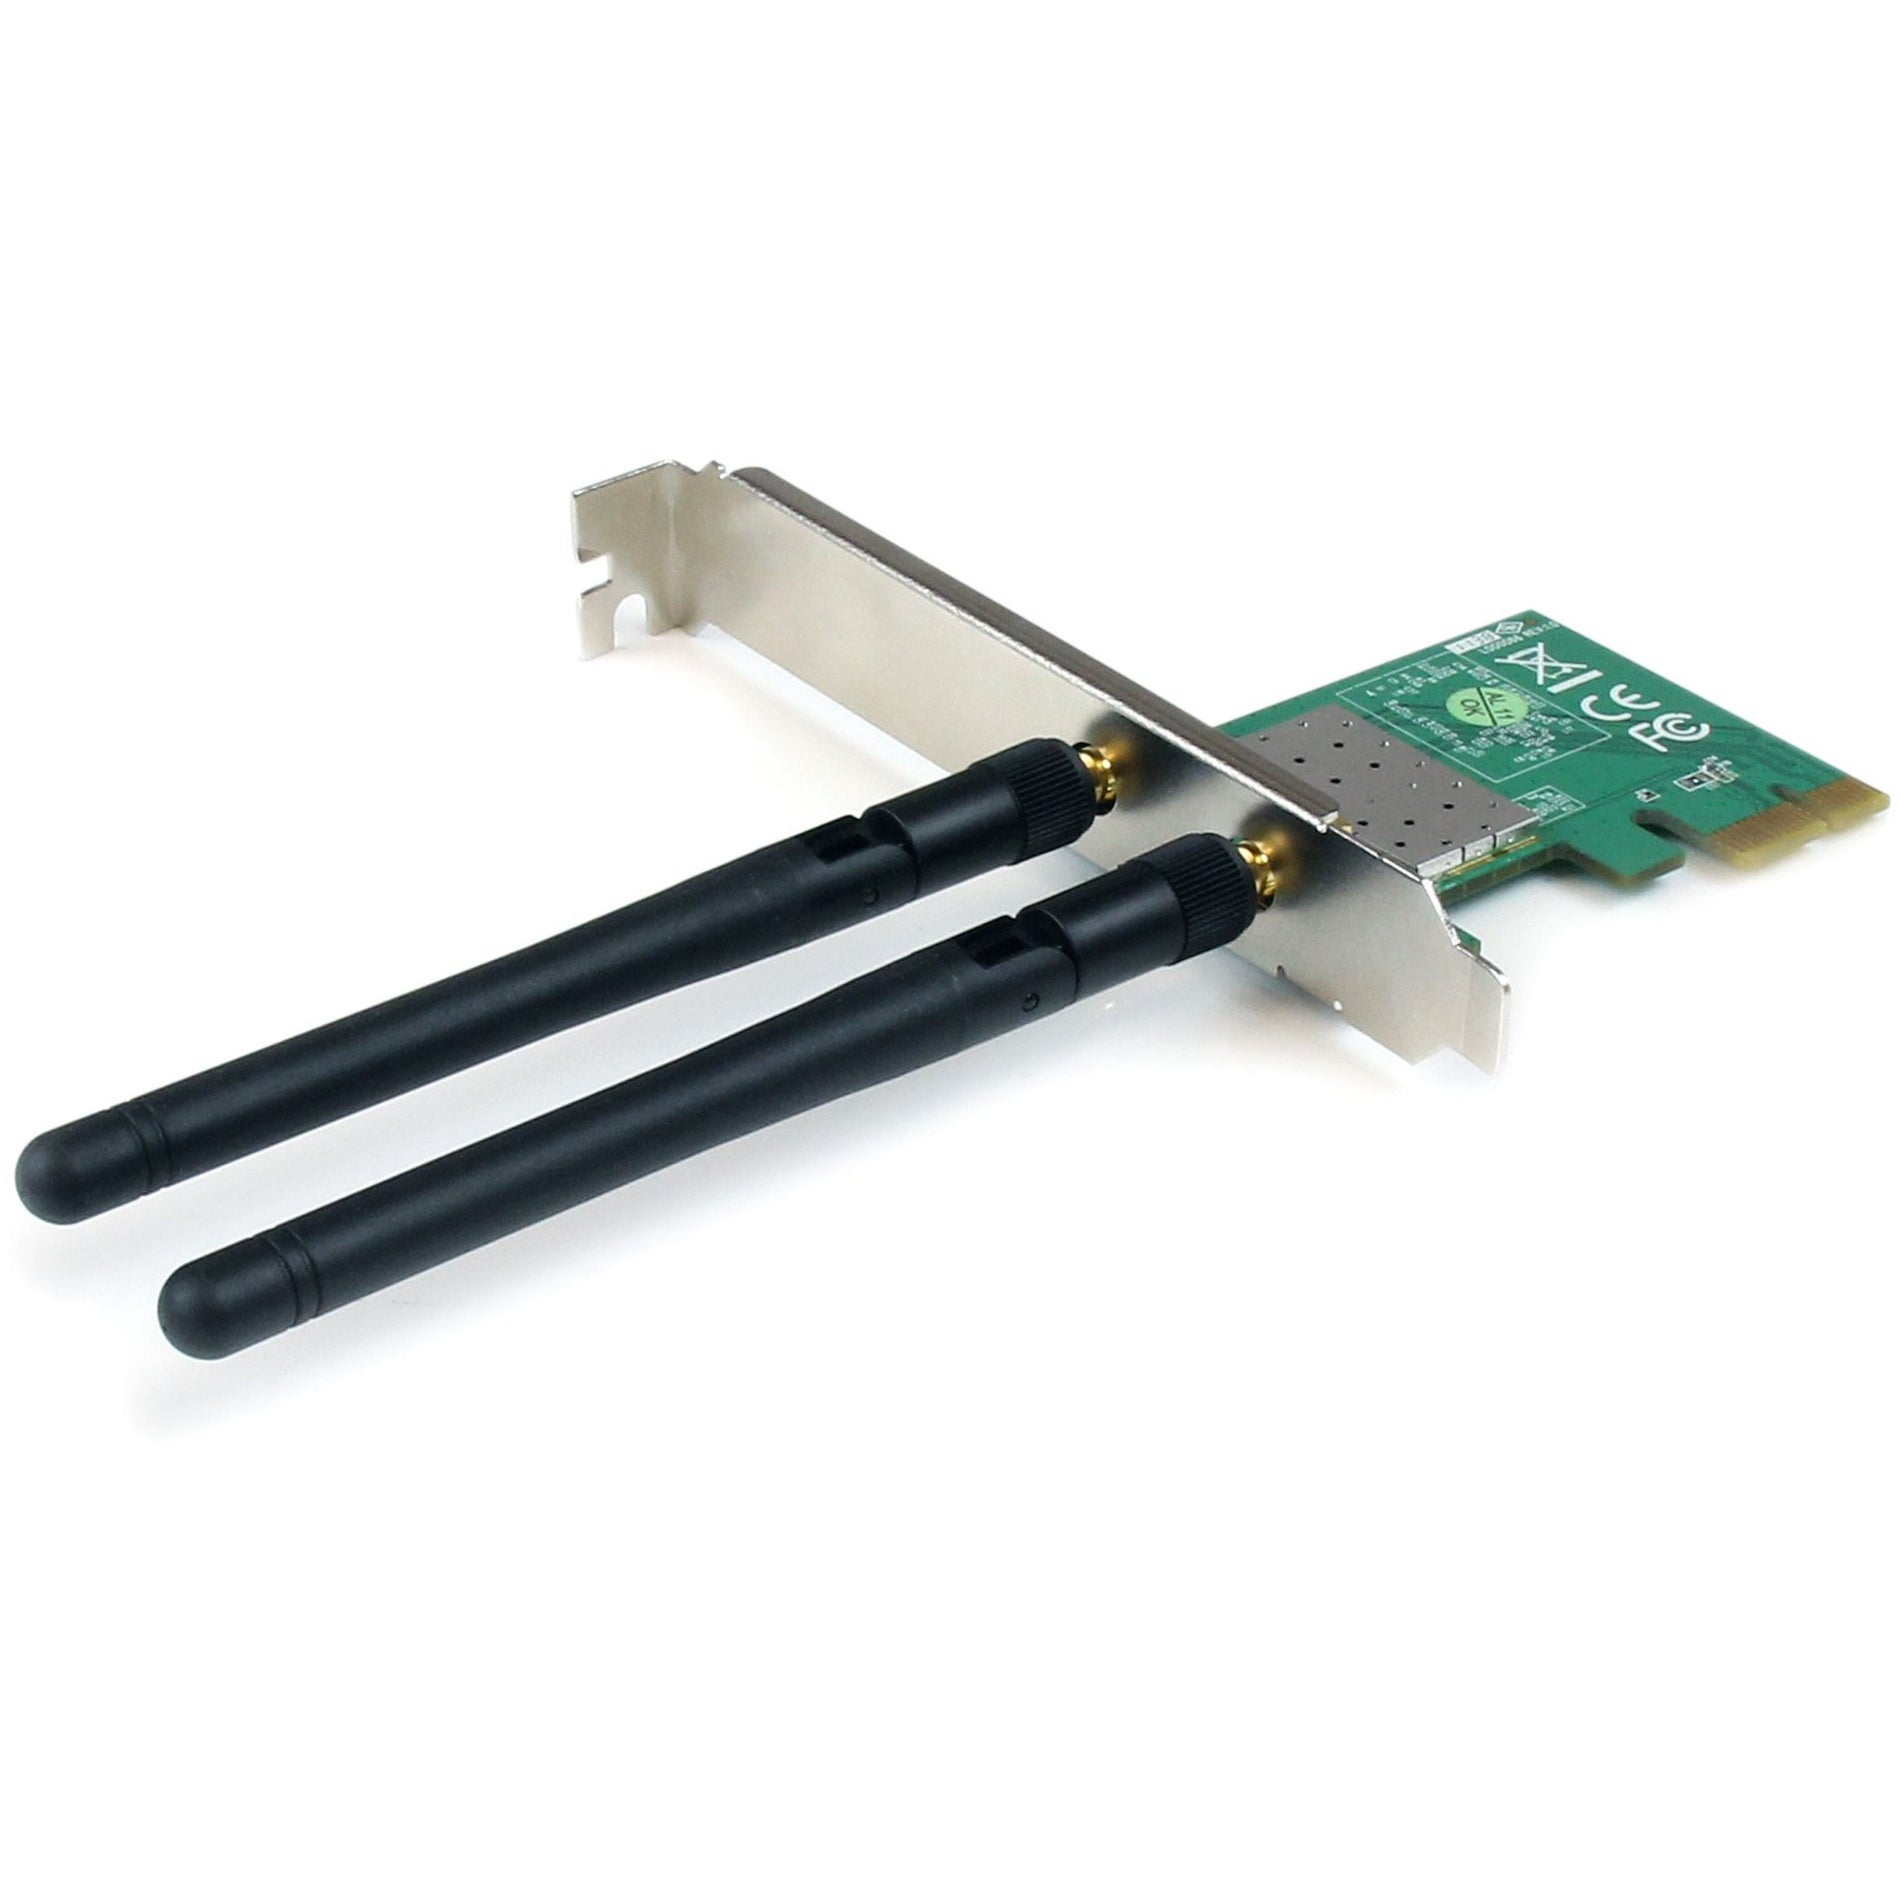 StarTech.com PEX300WN2X2 PCI Express Wireless N Adapter - 300 Mbps PCIe 802.11 b/g/n Network Adapter Card, Reliable Wi-Fi Connectivity for Desktop Computers